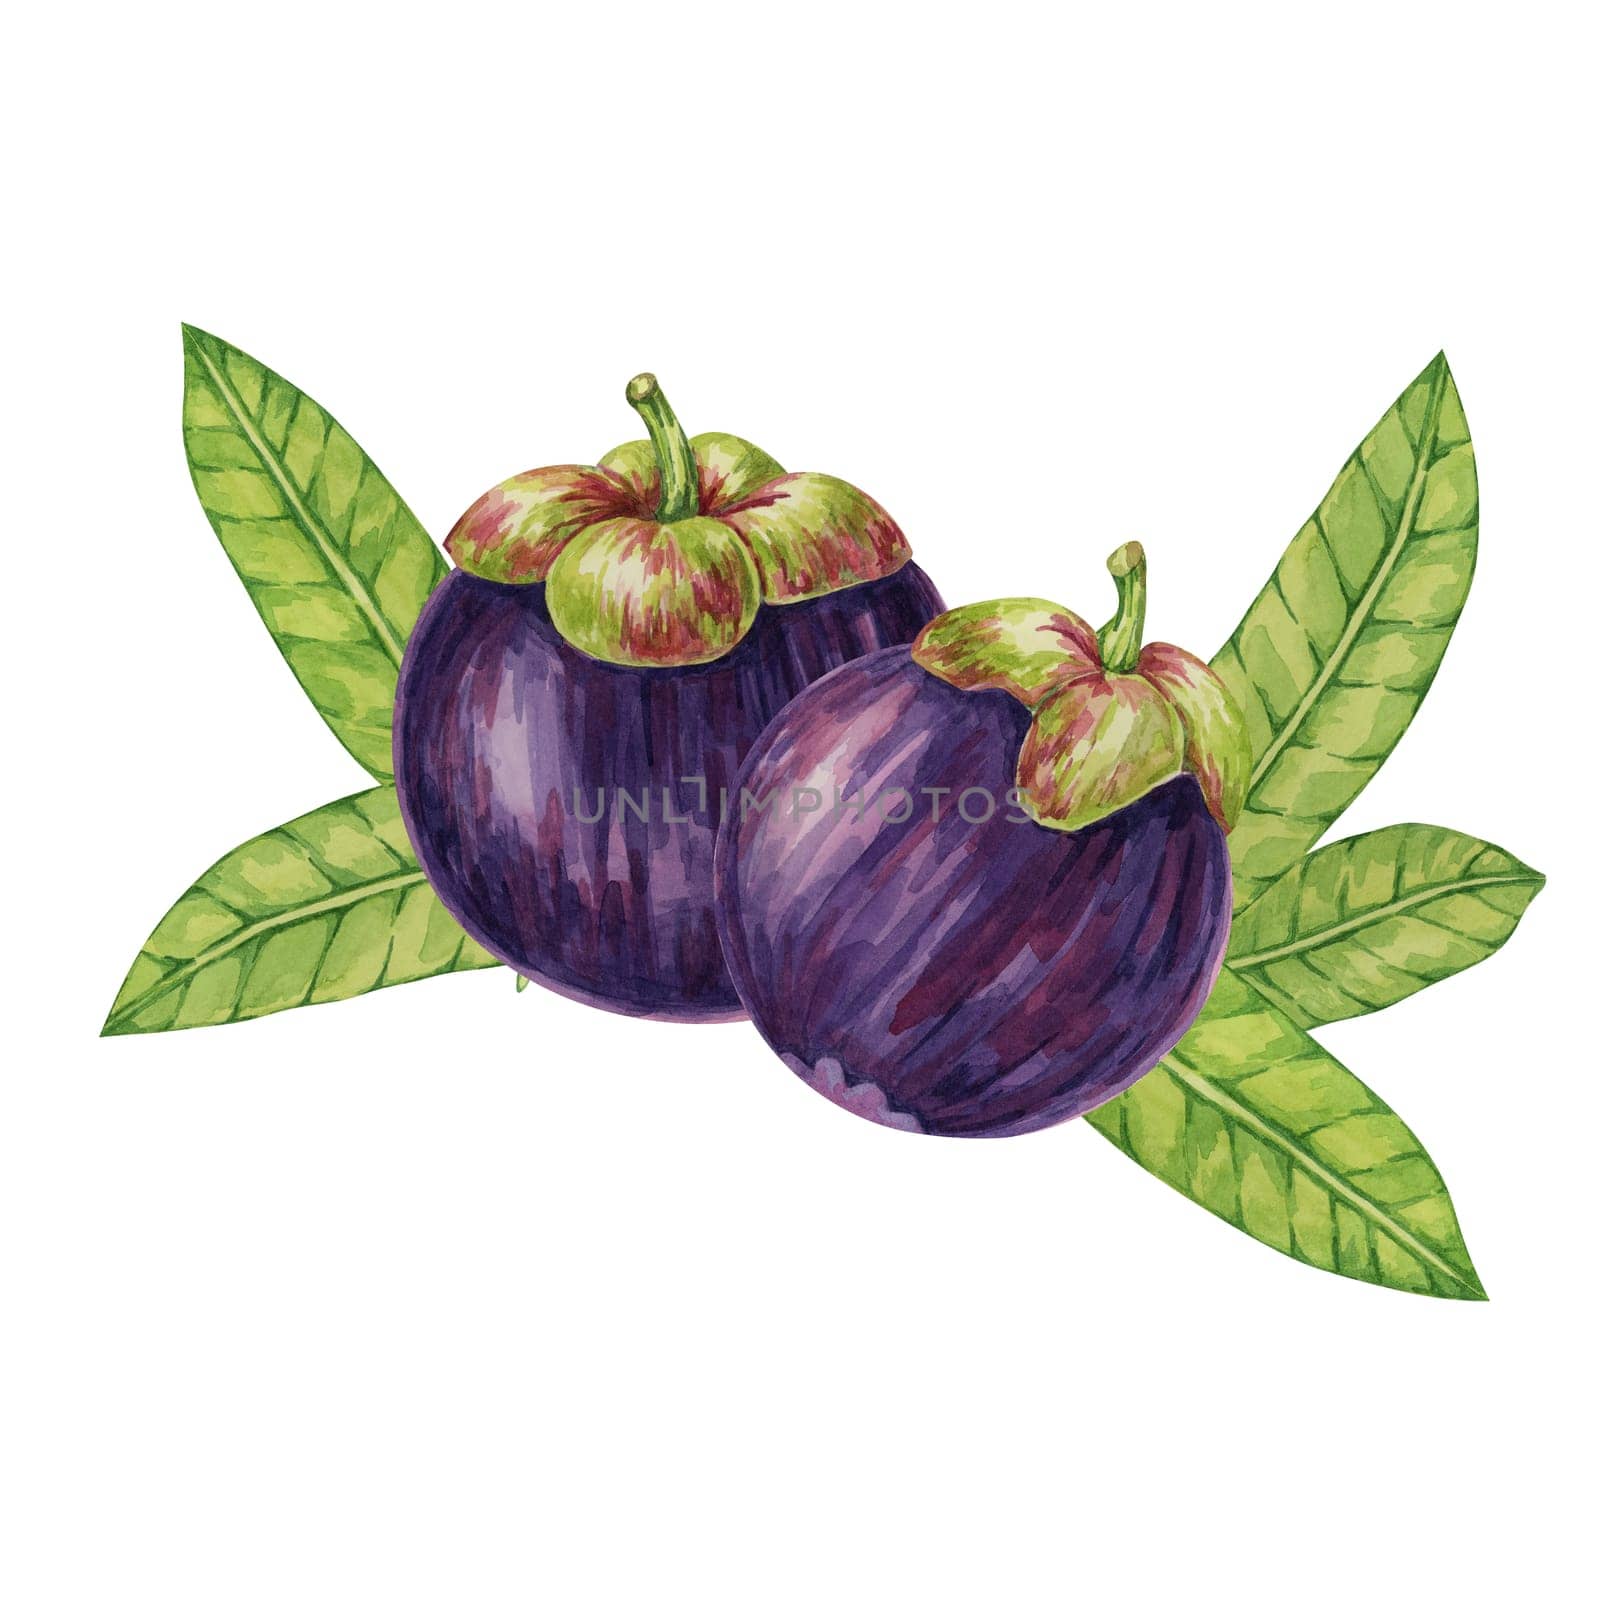 Two Purple mangosteen fruits, leaf tropical exotic Asian plant clipart. Garcinia mangostana watercolor illustration for sticker, label, food packaging by Fofito